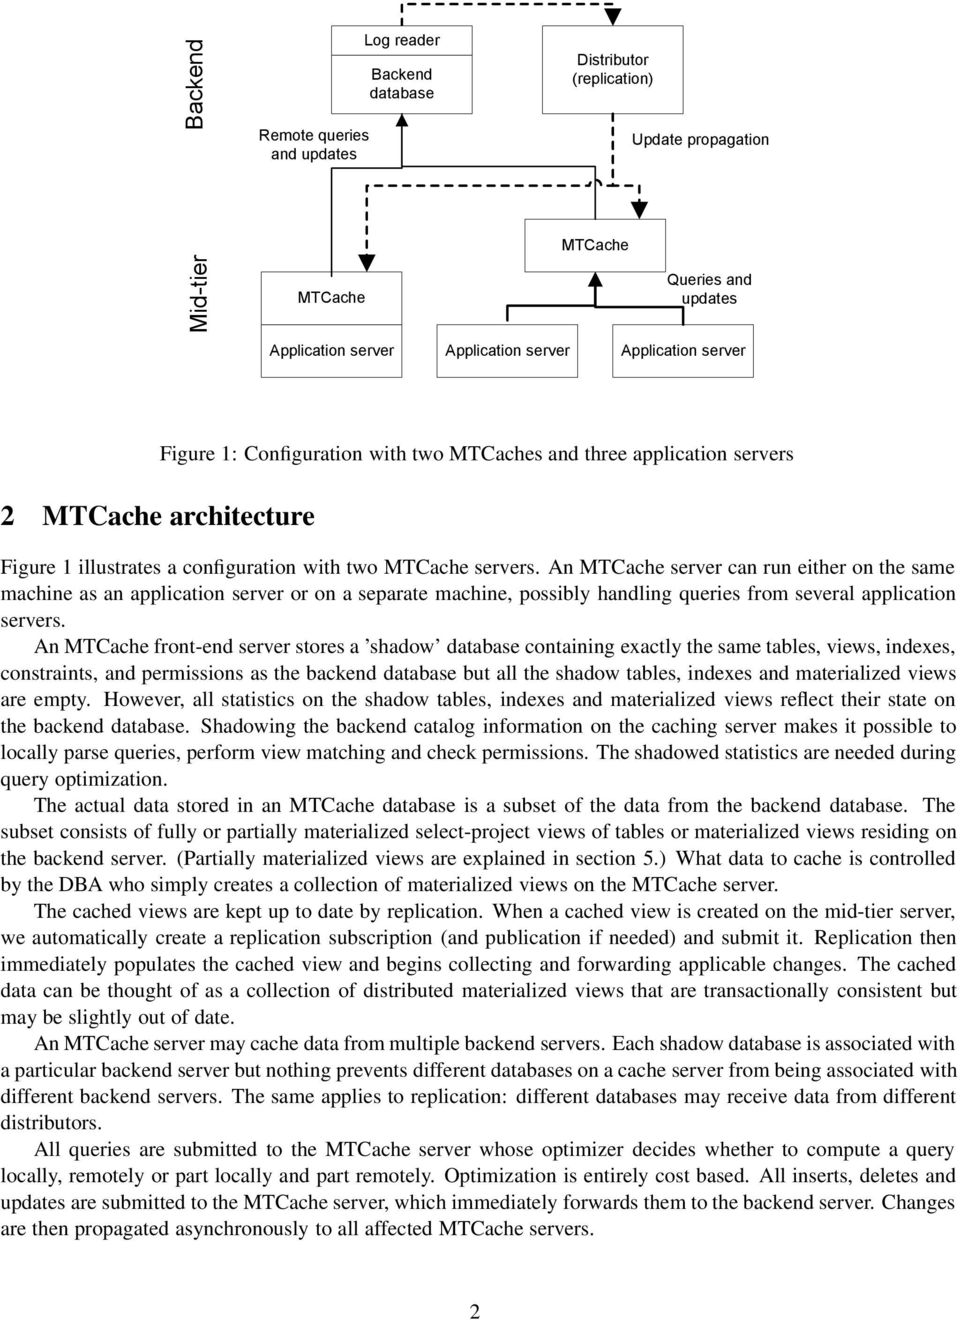 An MTCache server can run either on the same machine as an application server or on a separate machine, possibly handling queries from several application servers.